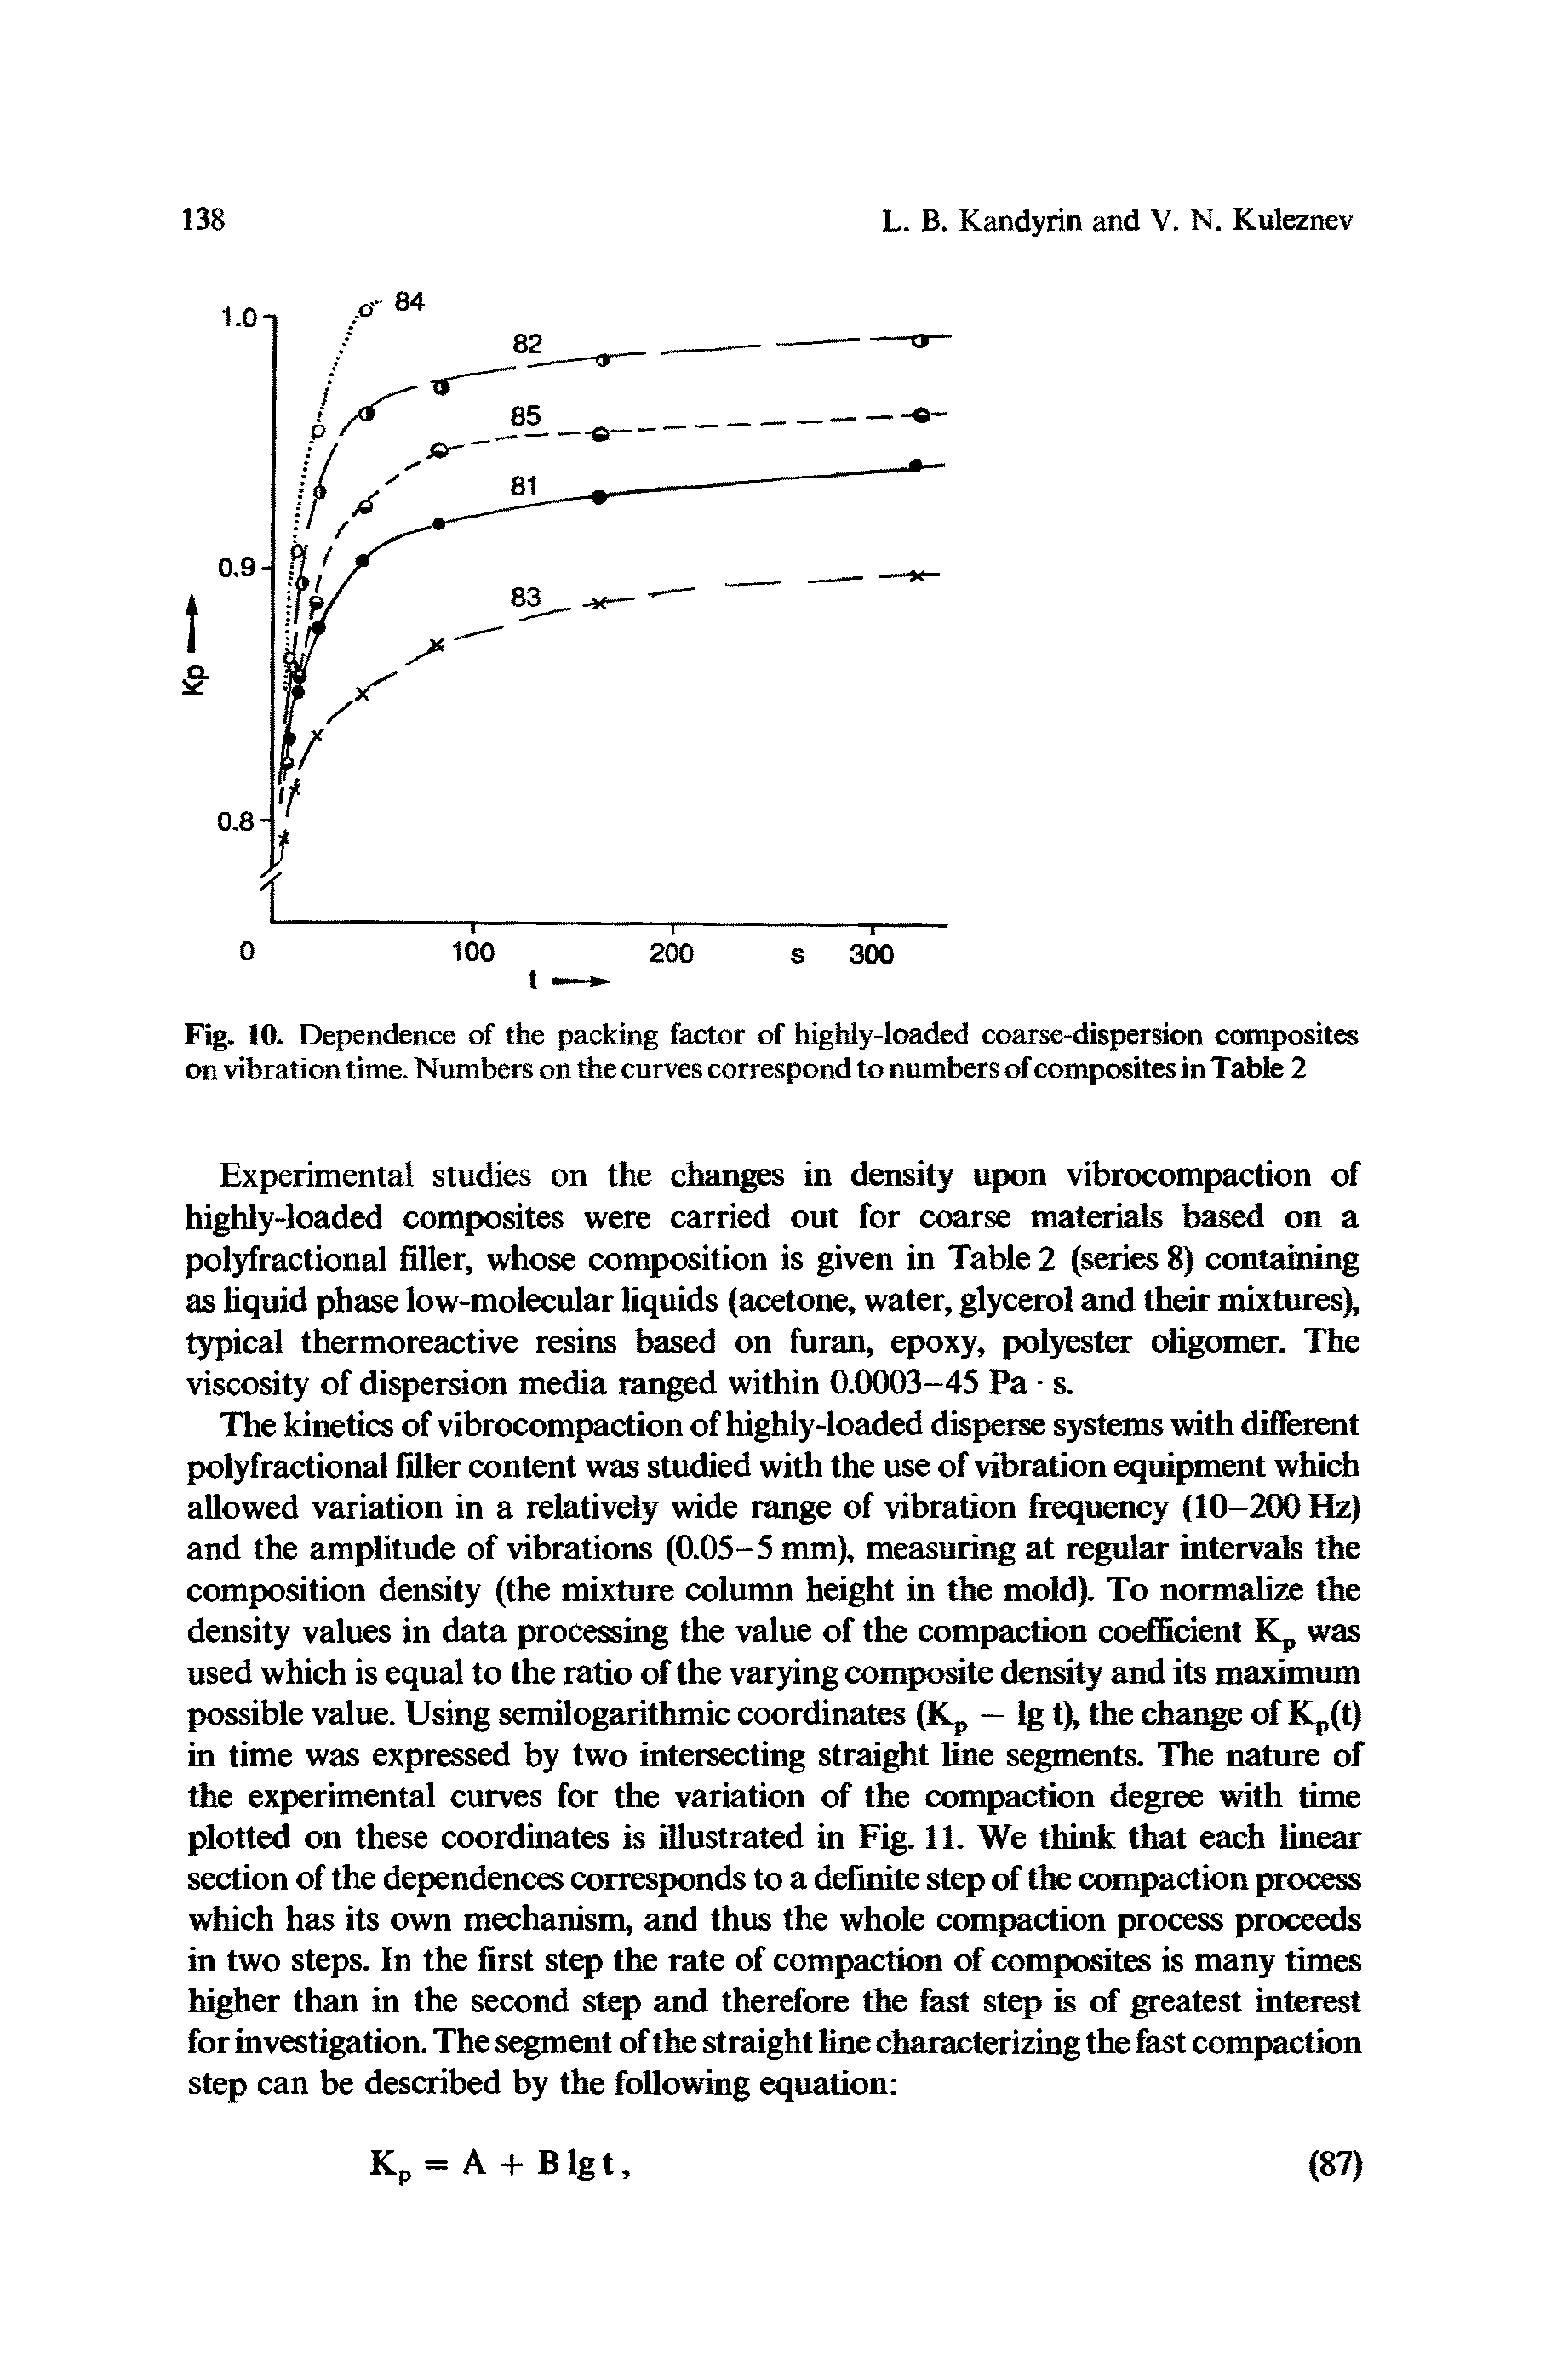 Fig. 10. Dependence of the packing factor of highly-loaded coarse-dispersion composites on vibration time. Numbers on the curves correspond to numbers of composites in Table 2...